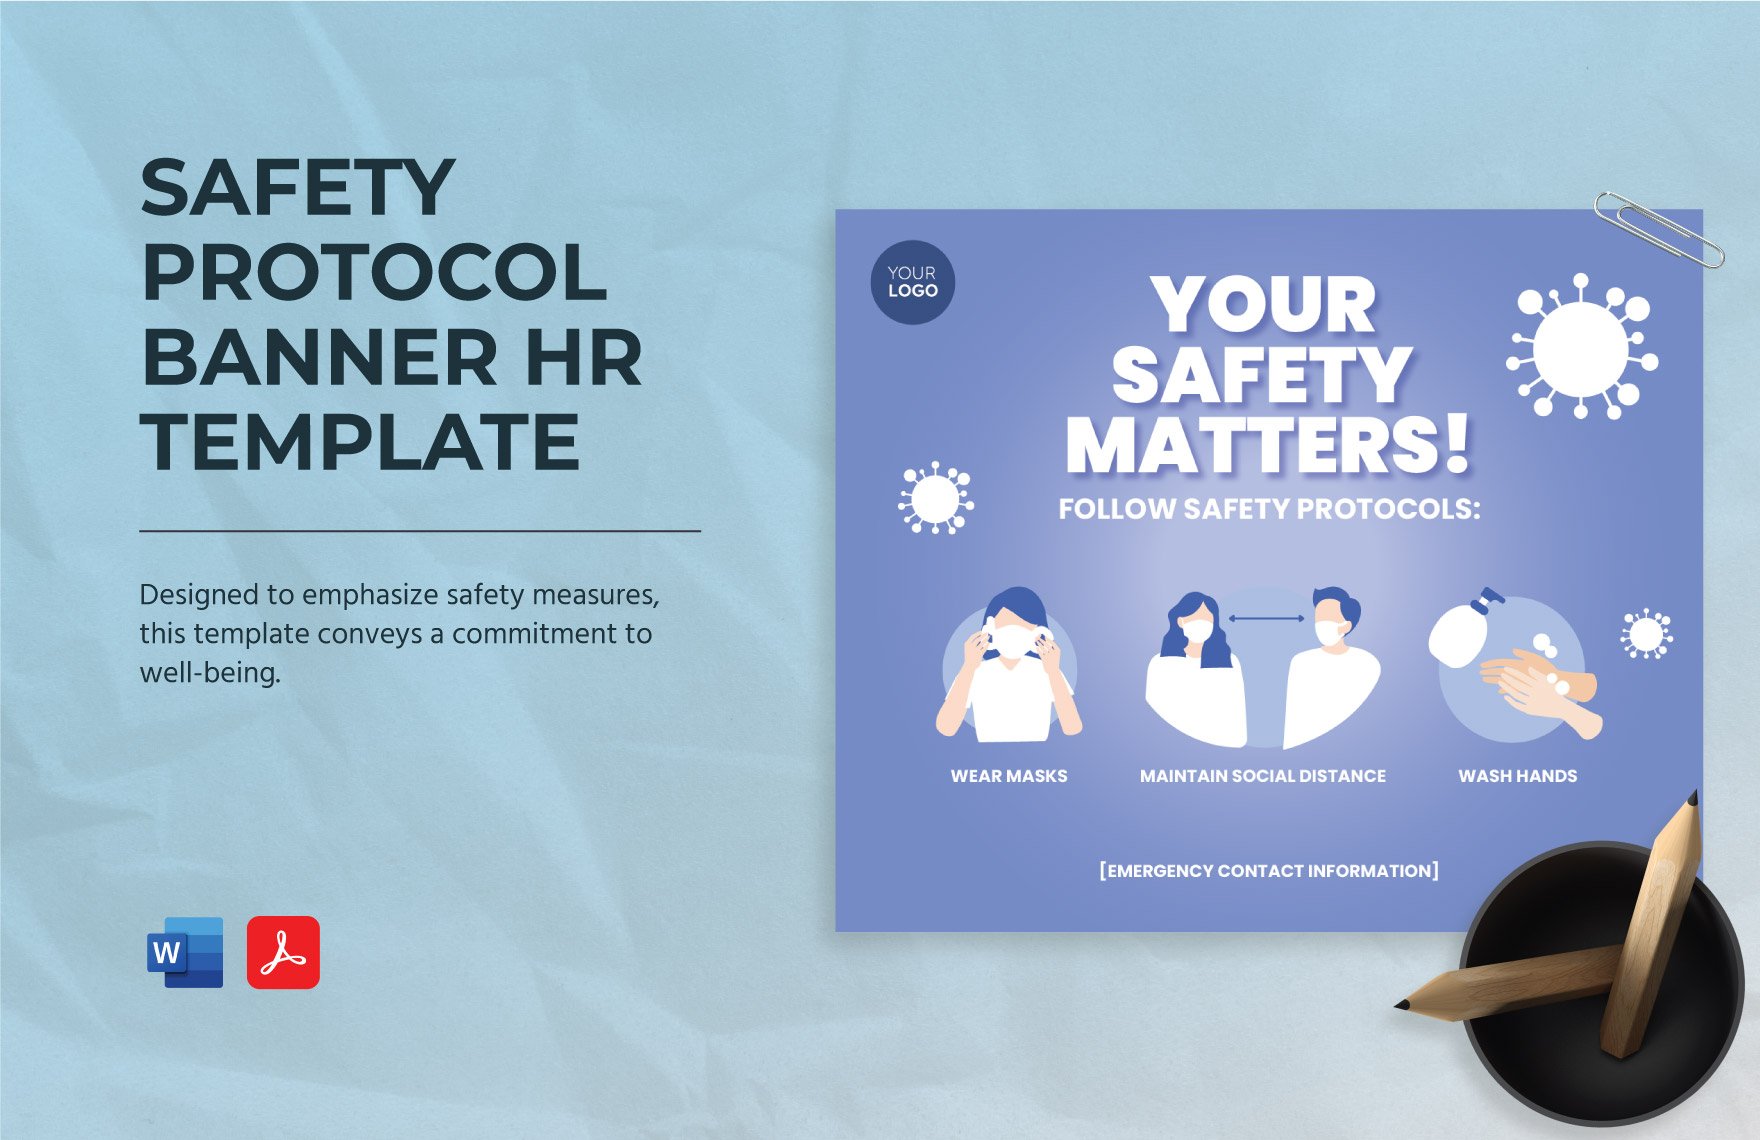 Safety Protocol Banner HR Template